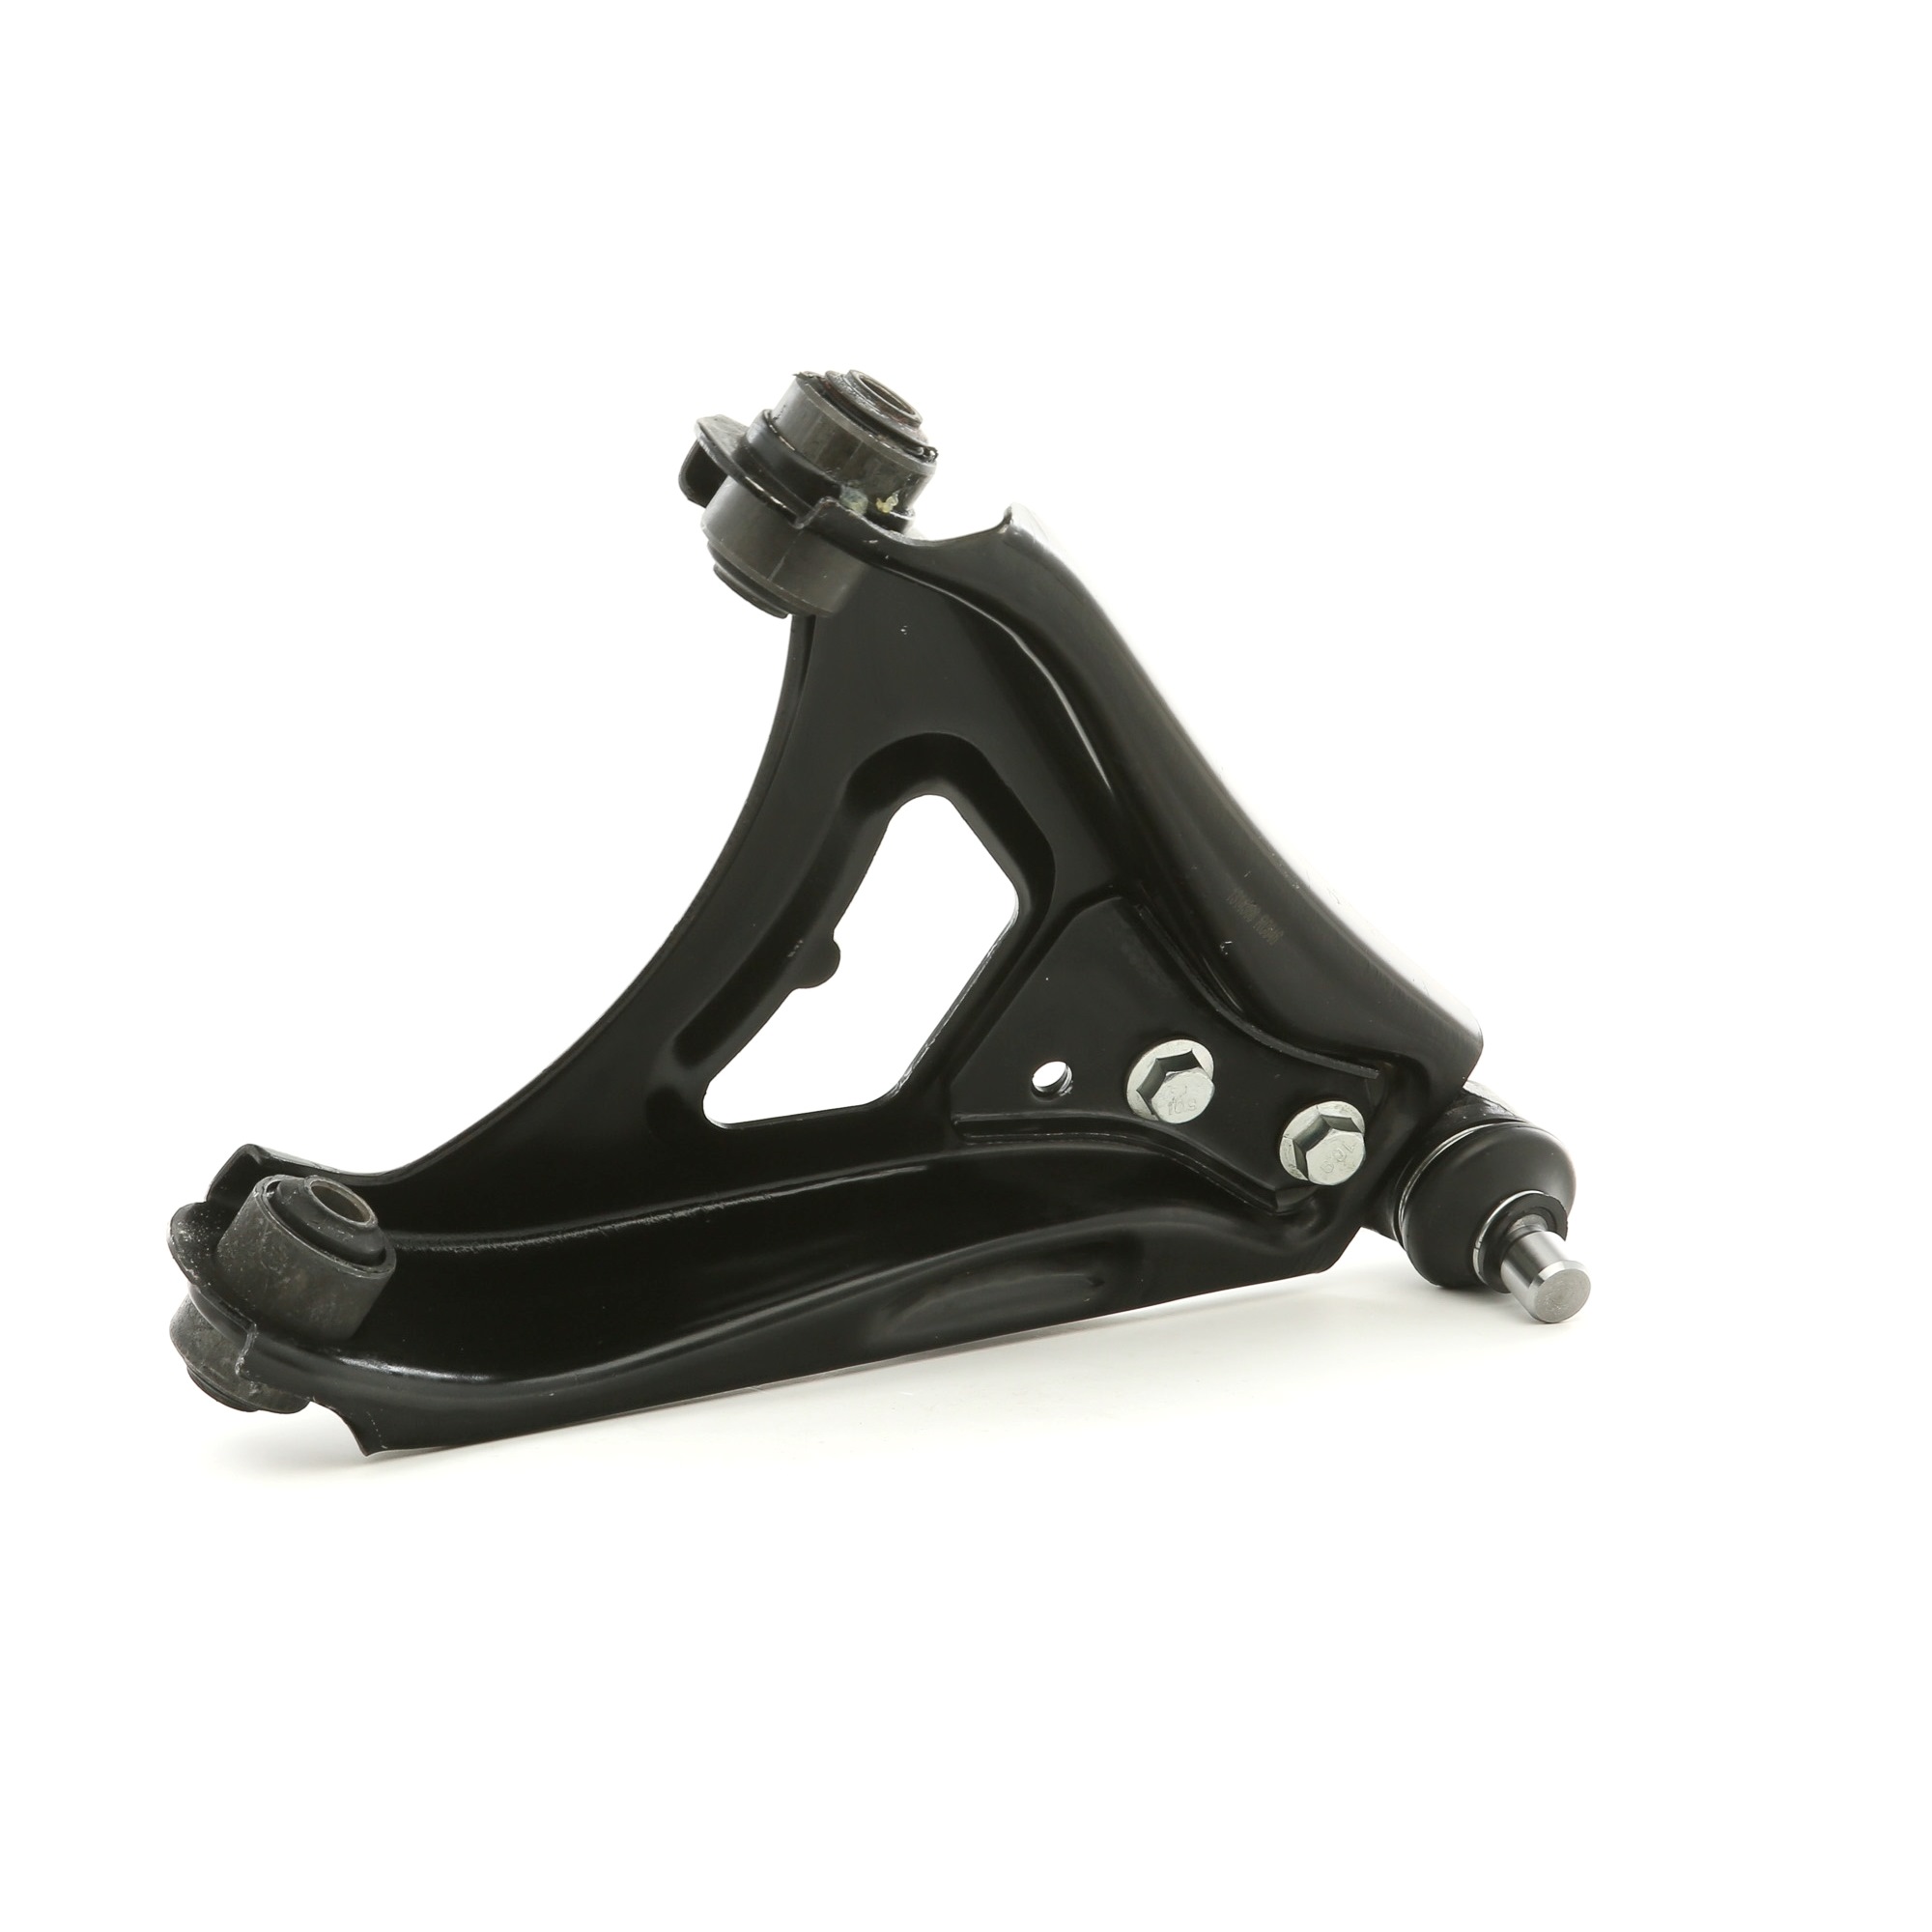 A.B.S. 210460 Suspension arm with ball joint, with rubber mount, Control Arm, Steel, Cone Size: 16 mm